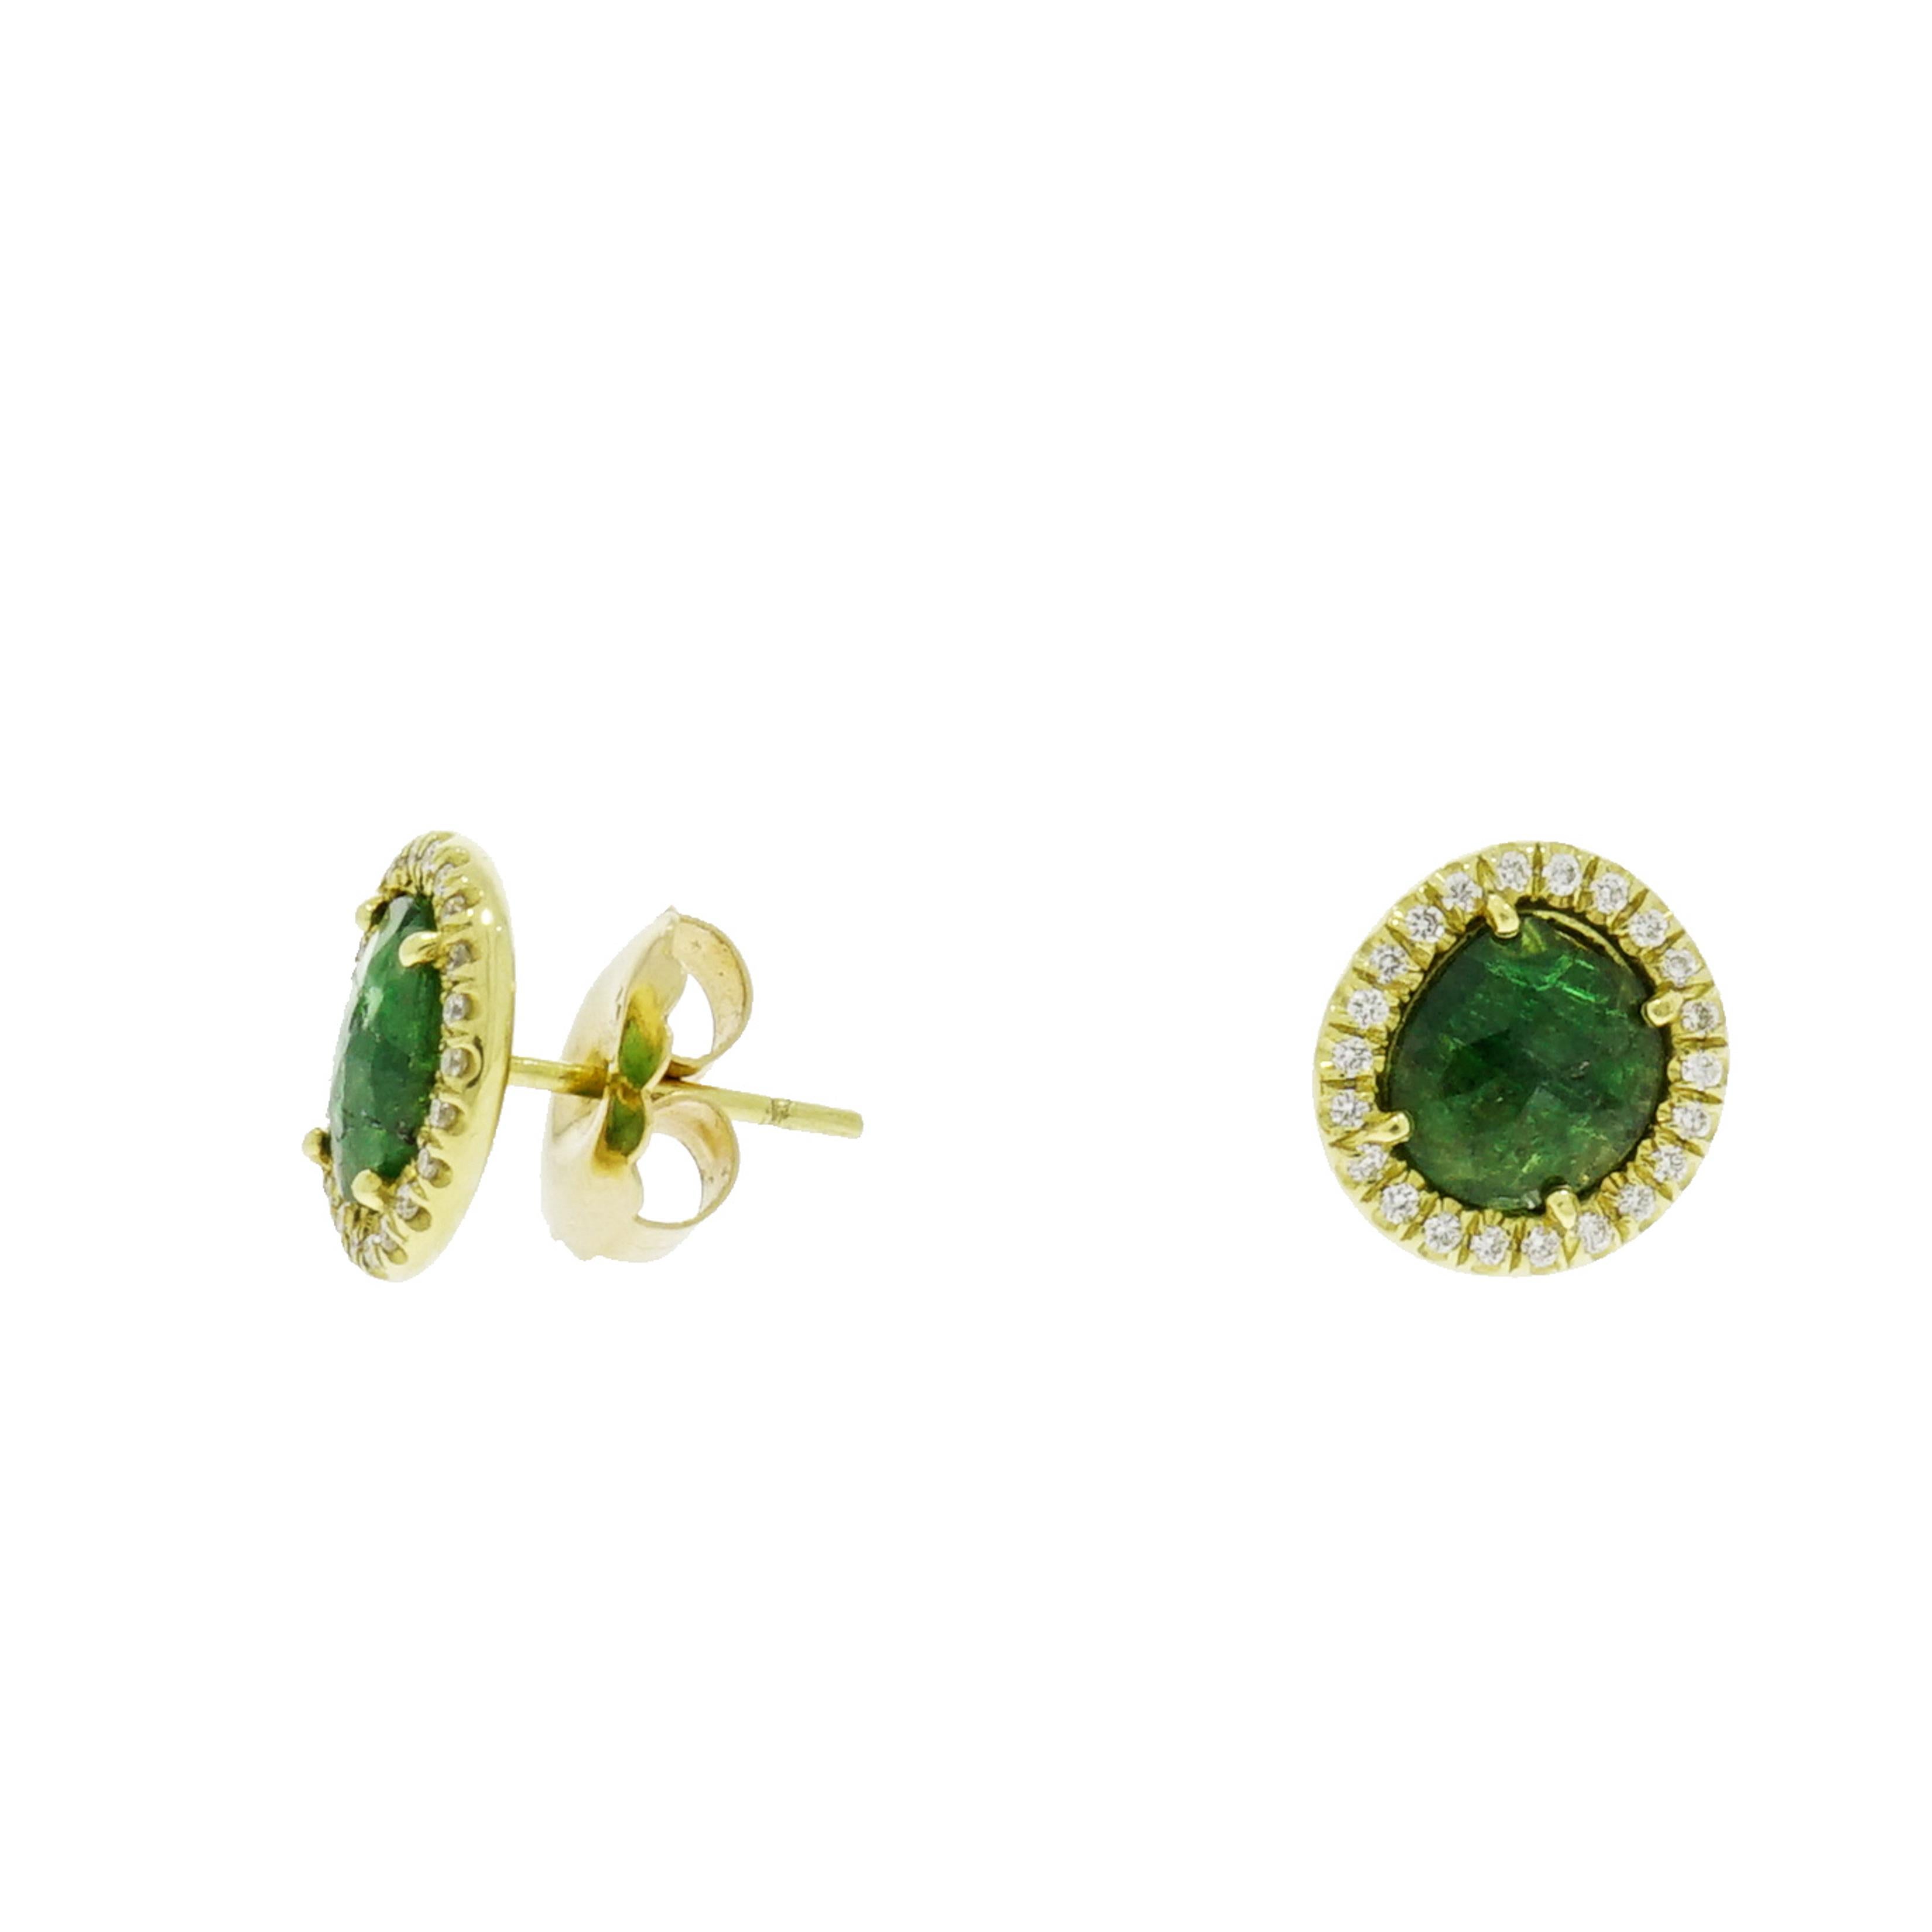 Green is known to relax the eyes and calm the nerves... This precious tsavorite and diamond stud earrings is blooming before your eyes and most definitely will relax you wearing it. 
Designed and crafted in NYC in 18k yellow gold and decorated with